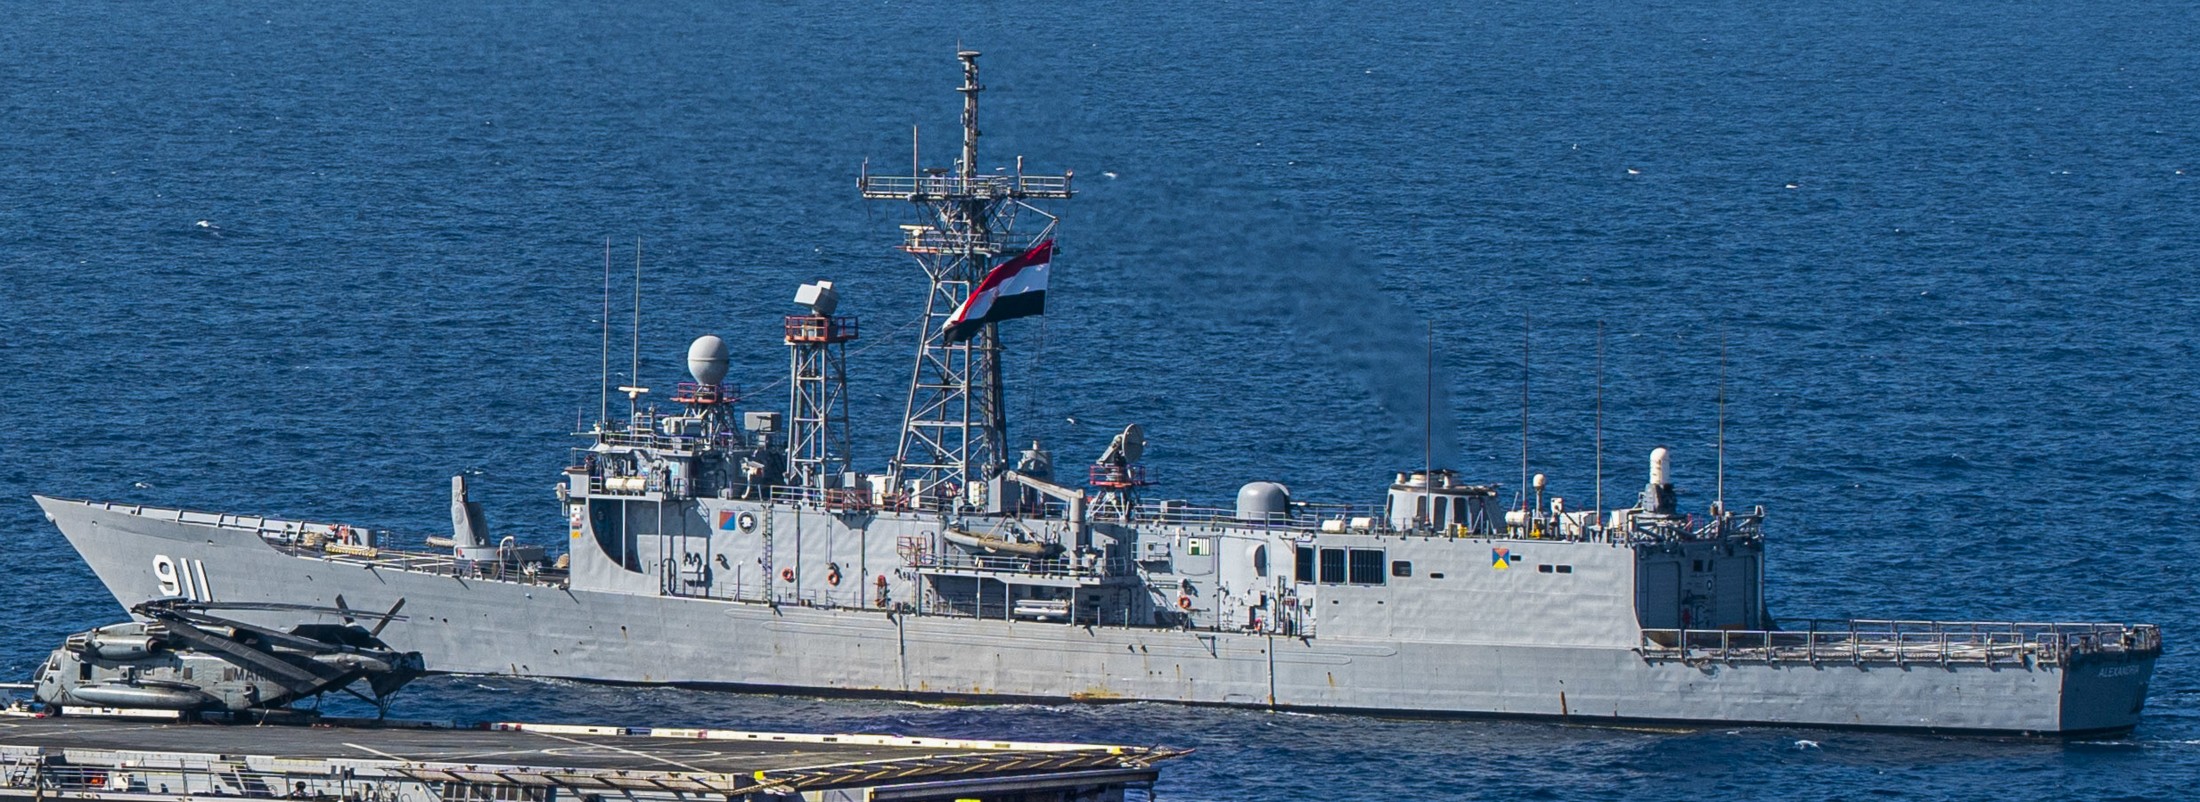 f-911 ens alexandria perry class frigate egyptian naval force navy 08